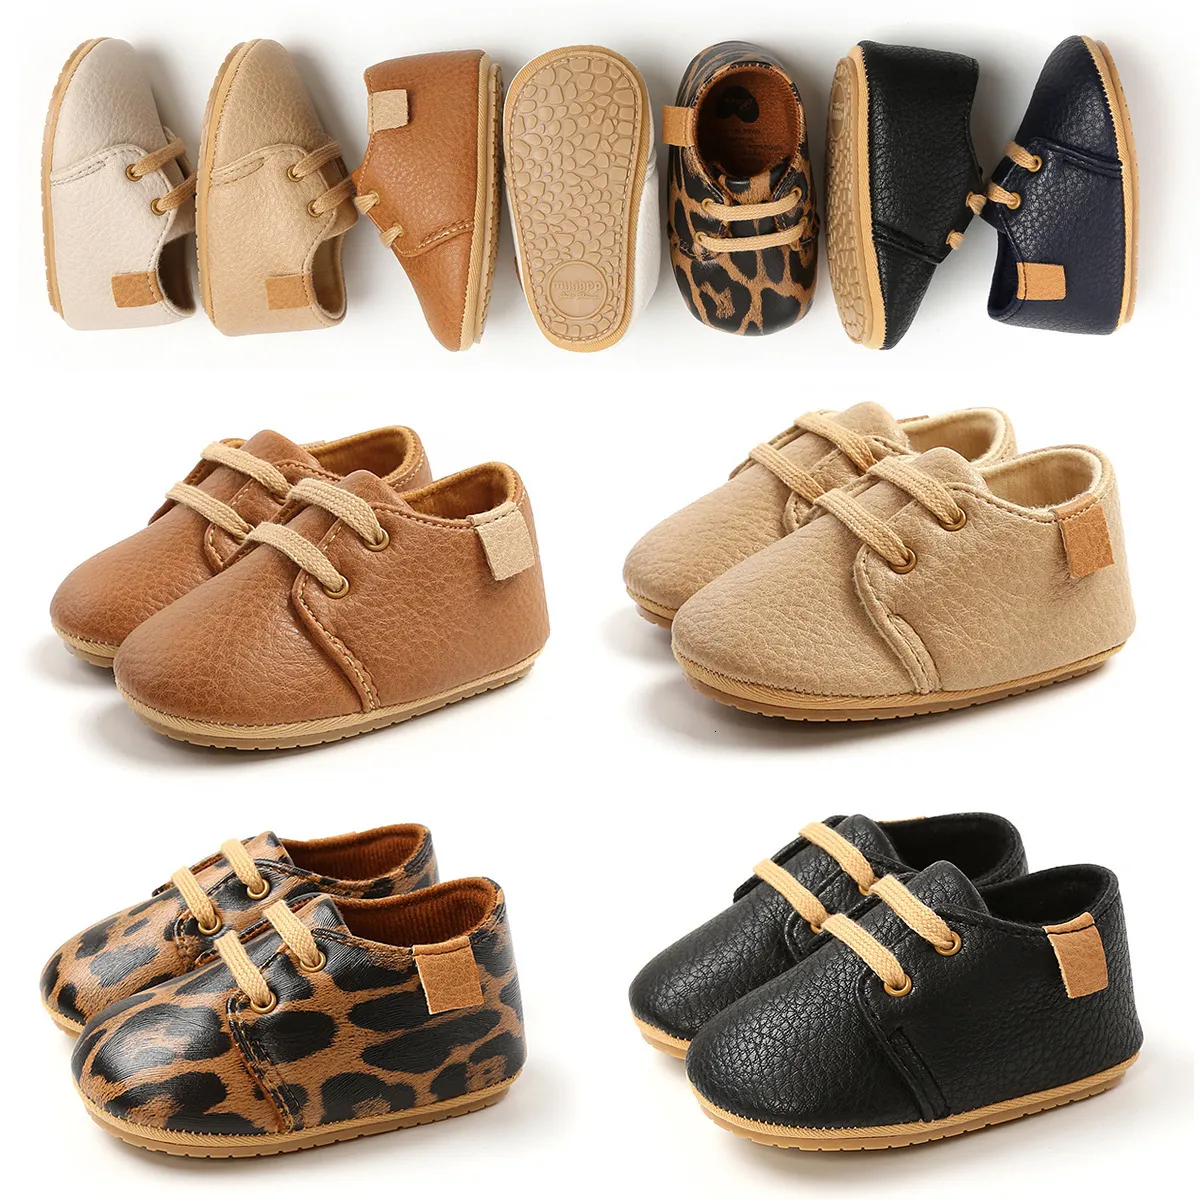 Newborn Baby Shoes Spring Leather Boy Girl Shoes Multicolor Toddler Rubber Sole Anti-slip First Walkers Infant Newborn Moccasins